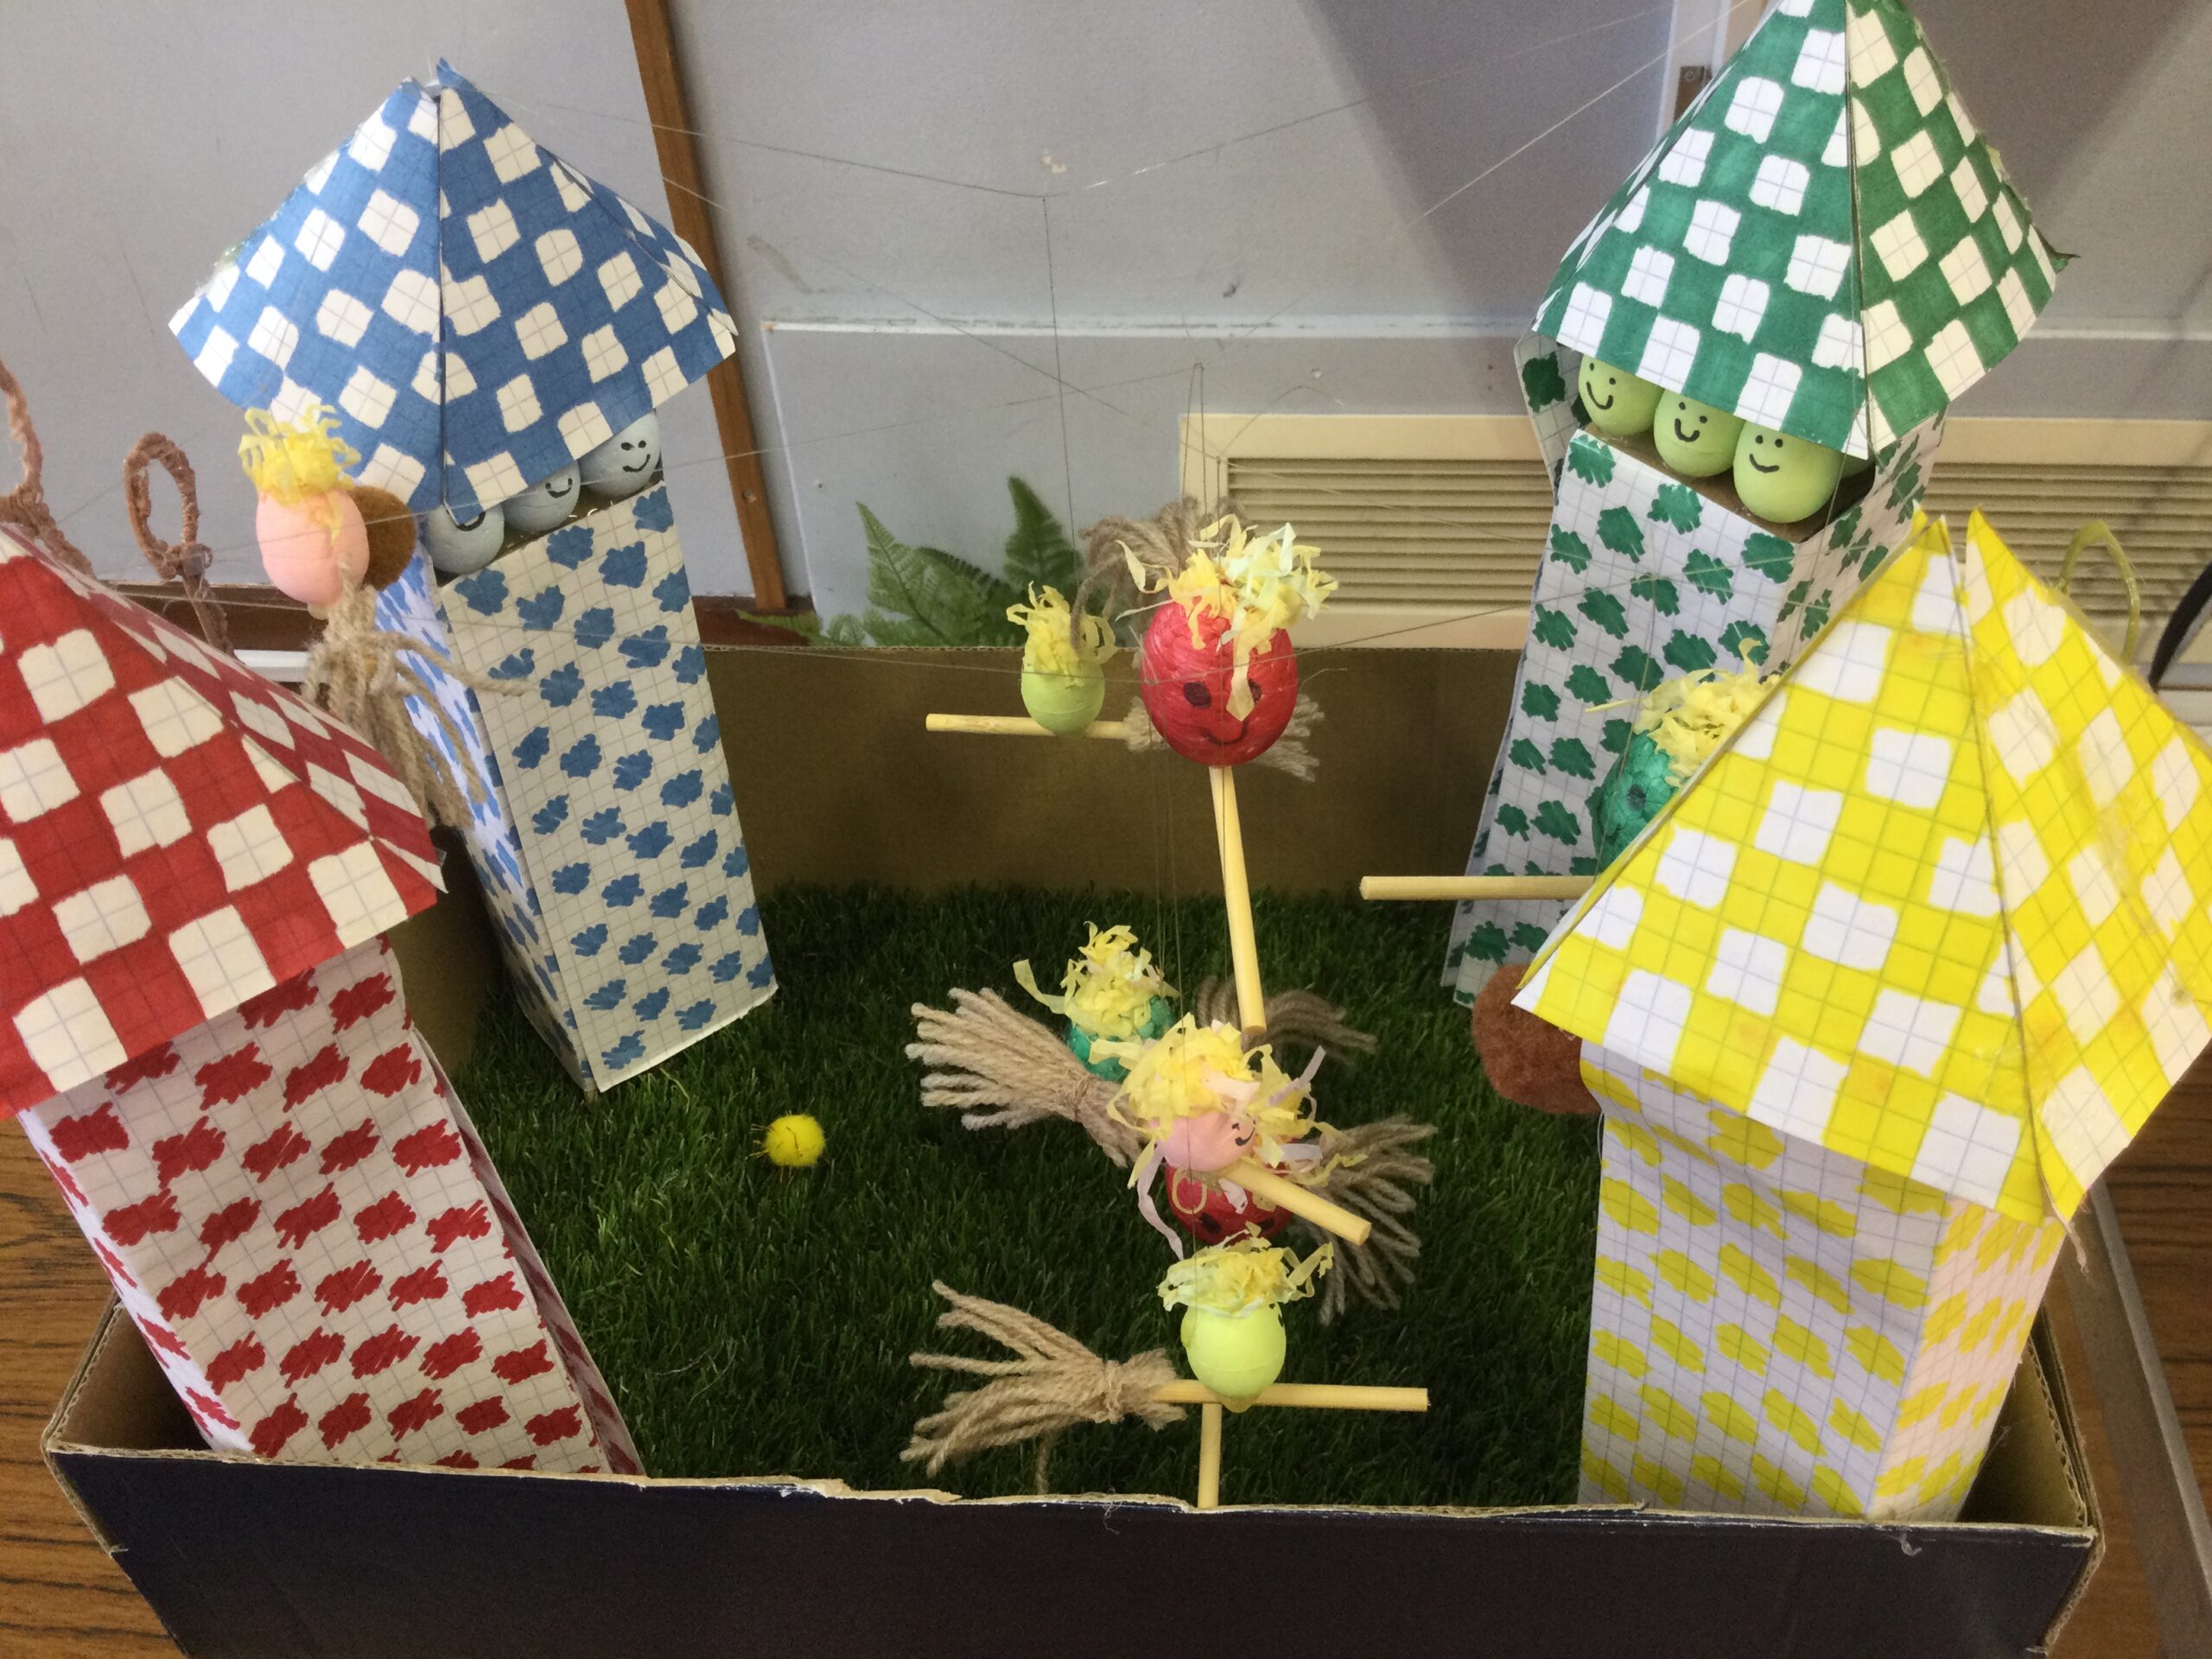 Spring House Competition